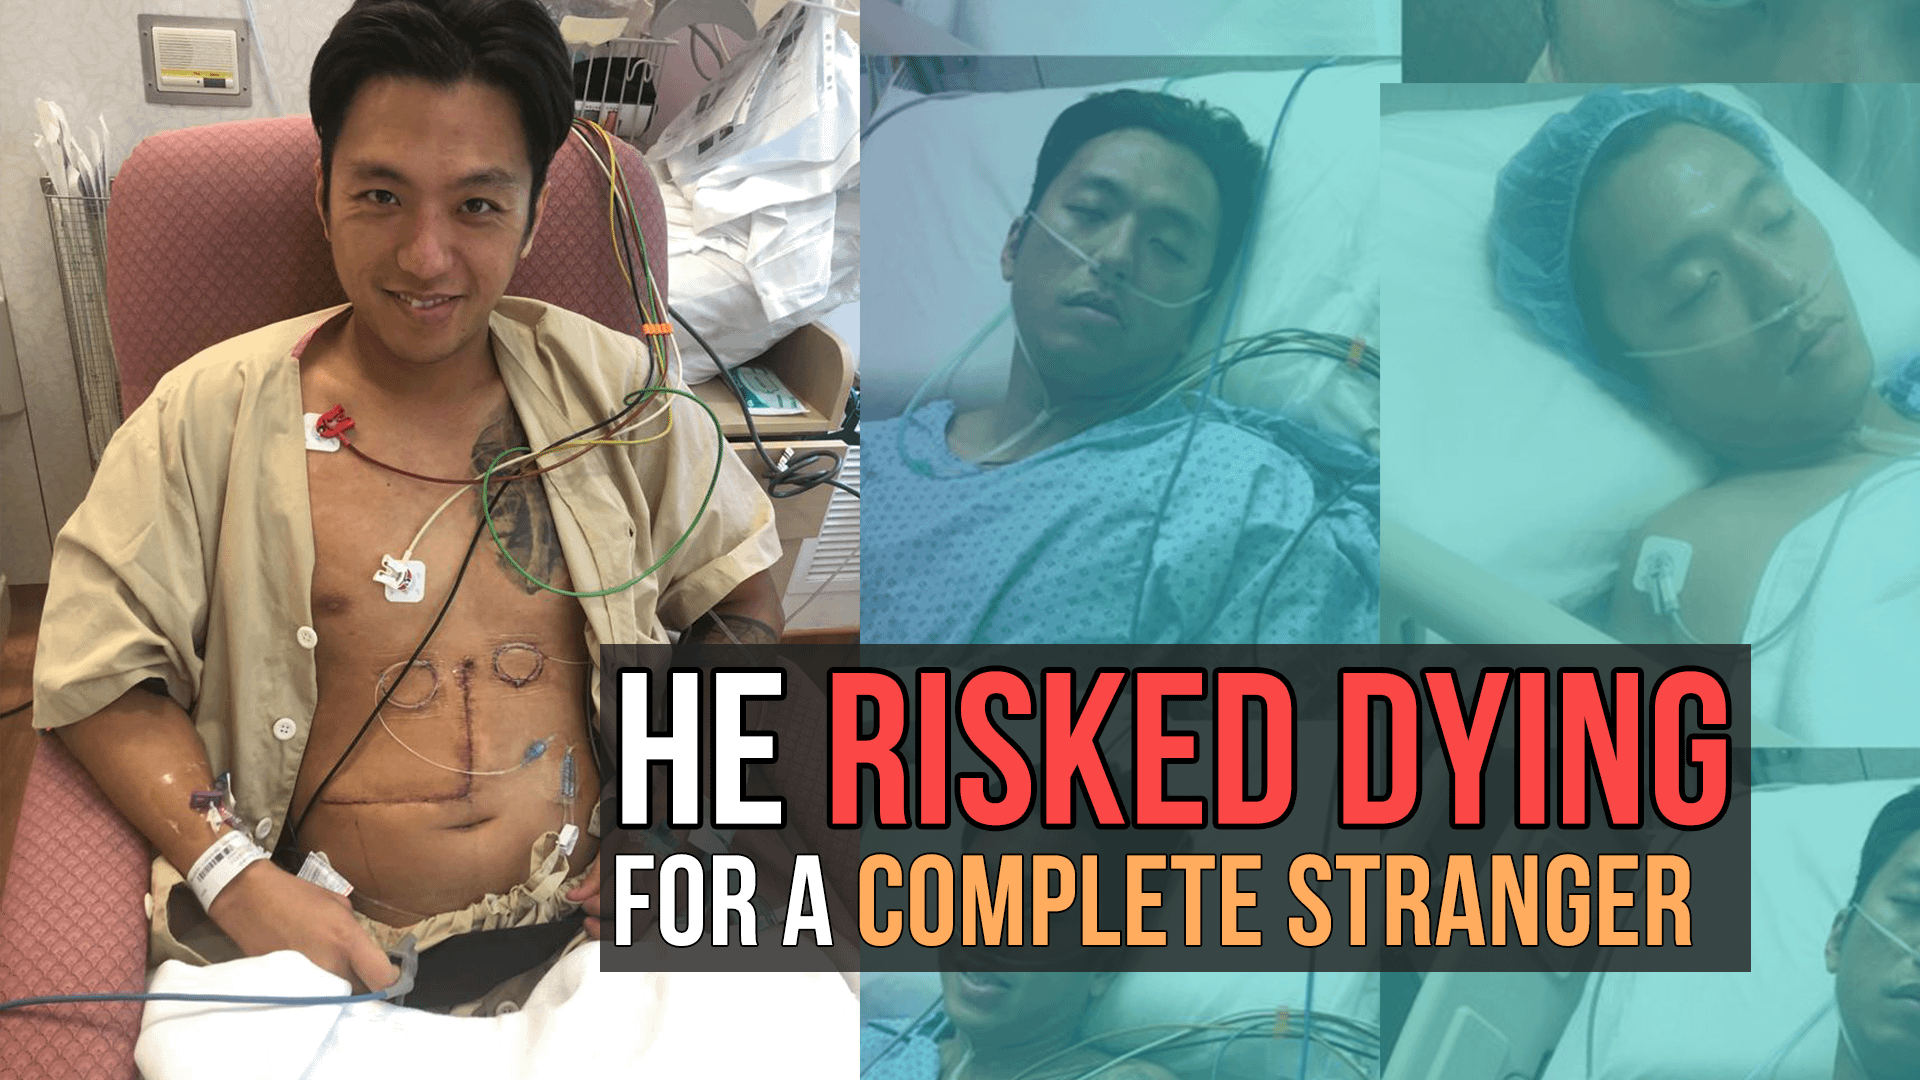 He risked dying for a complete stranger